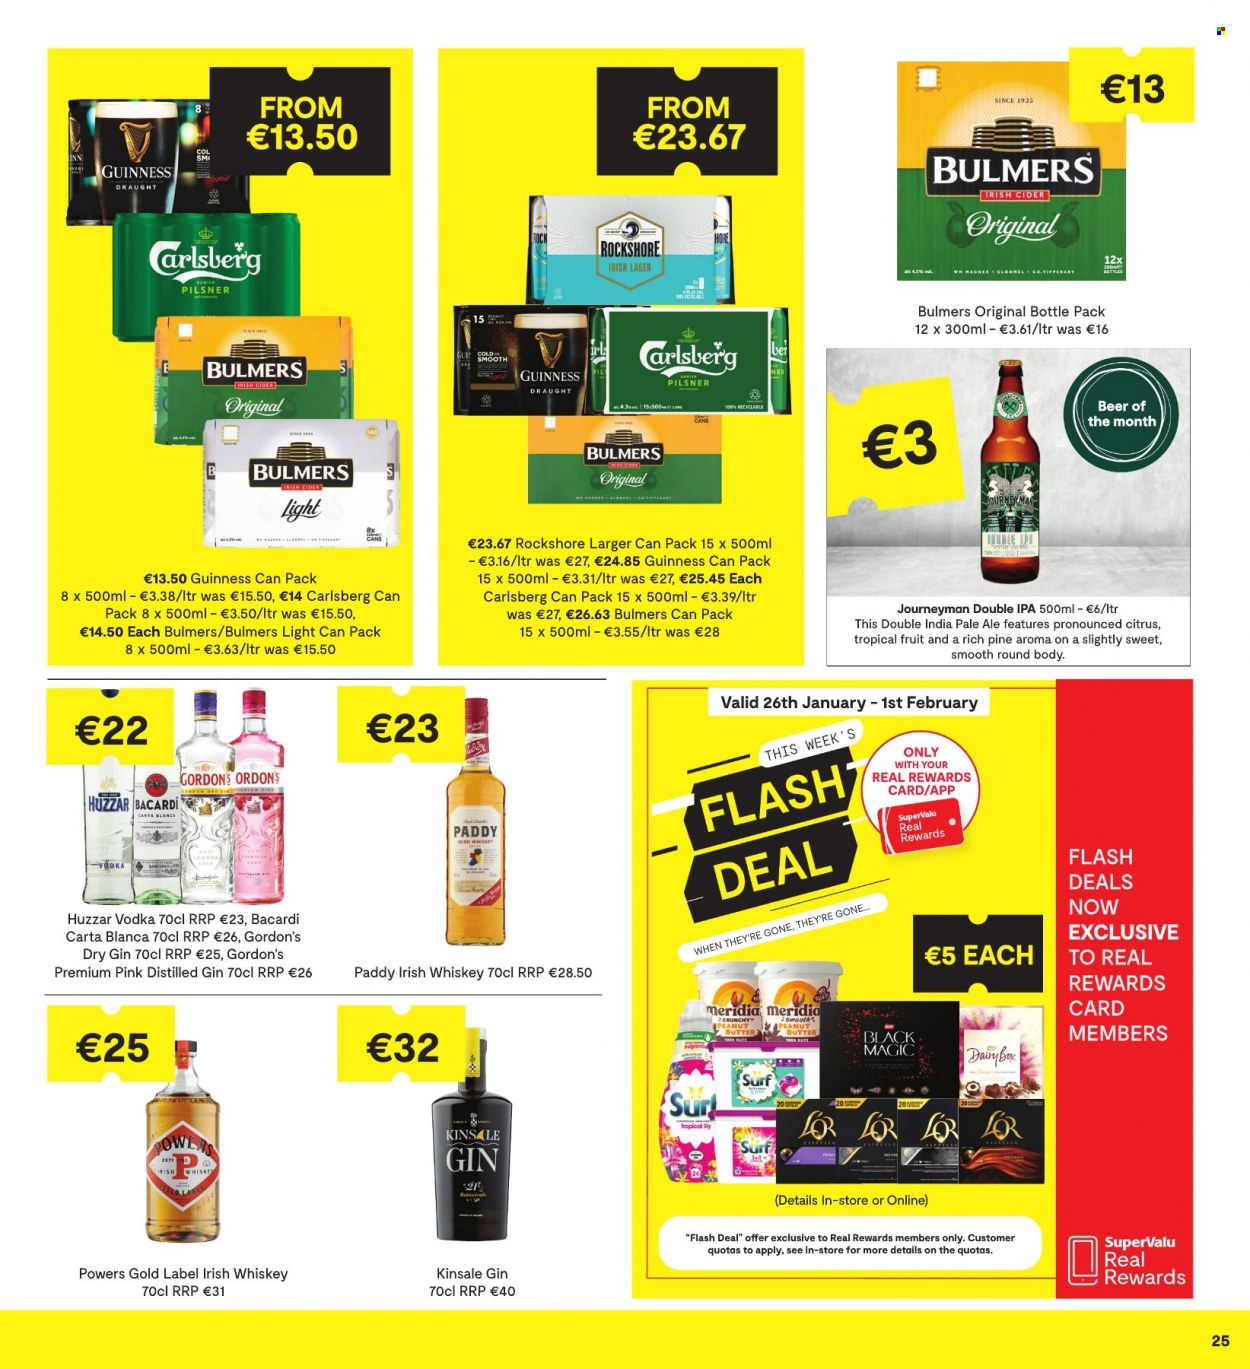 thumbnail - SuperValu offer  - 26.01.2023 - 08.02.2023 - Sales products - L'Or, Bacardi, gin, vodka, whiskey, irish whiskey, Gordon's, whisky, cider, beer, Bulmers, Carlsberg, Guinness, Lager, IPA, Rockshore, Surf. Page 25.